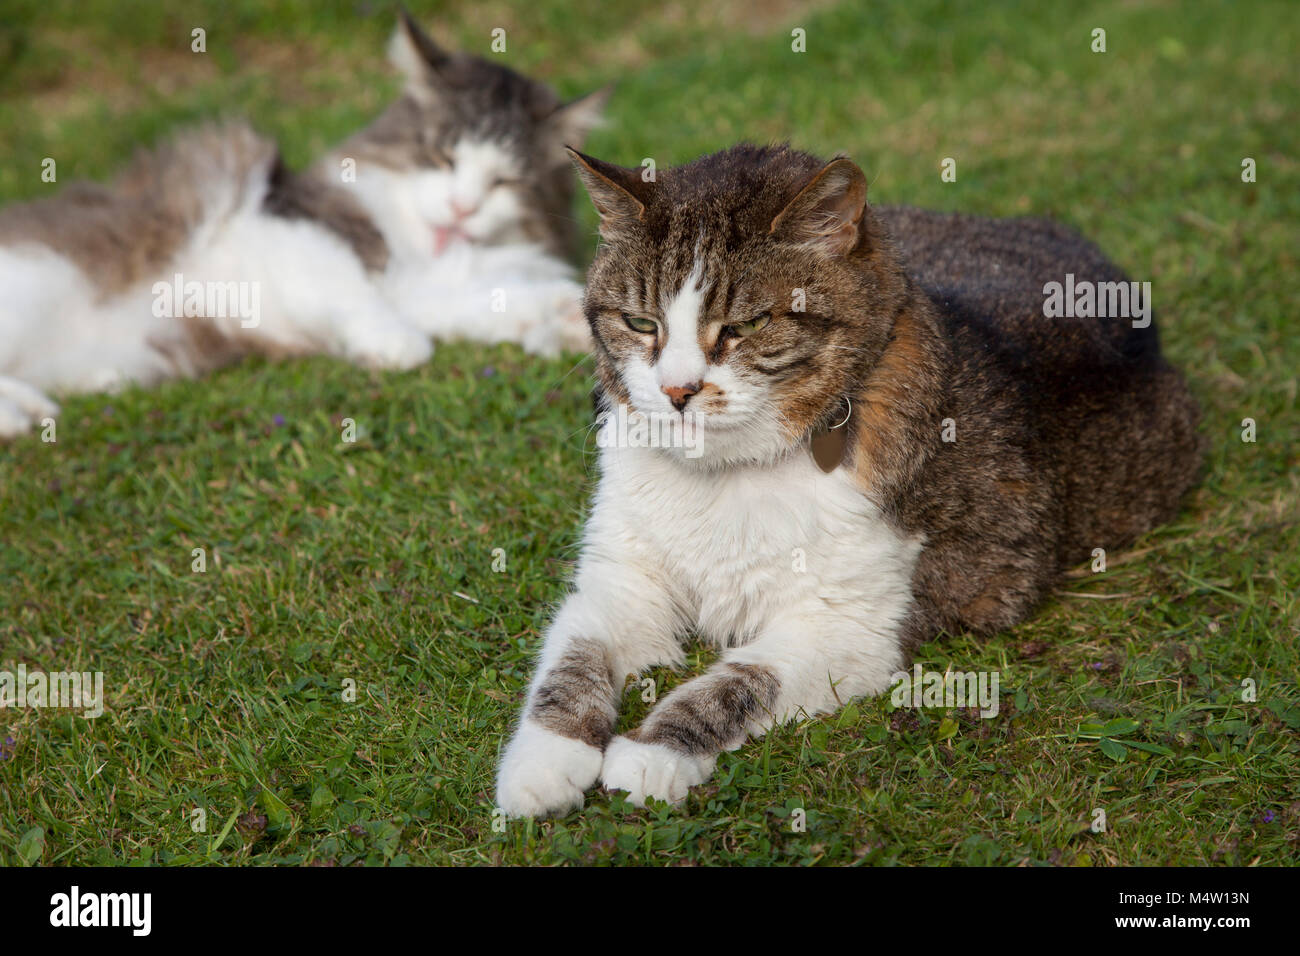 Tabby cat and tortoiseshell and white cats lying together on a lawn Stock Photo